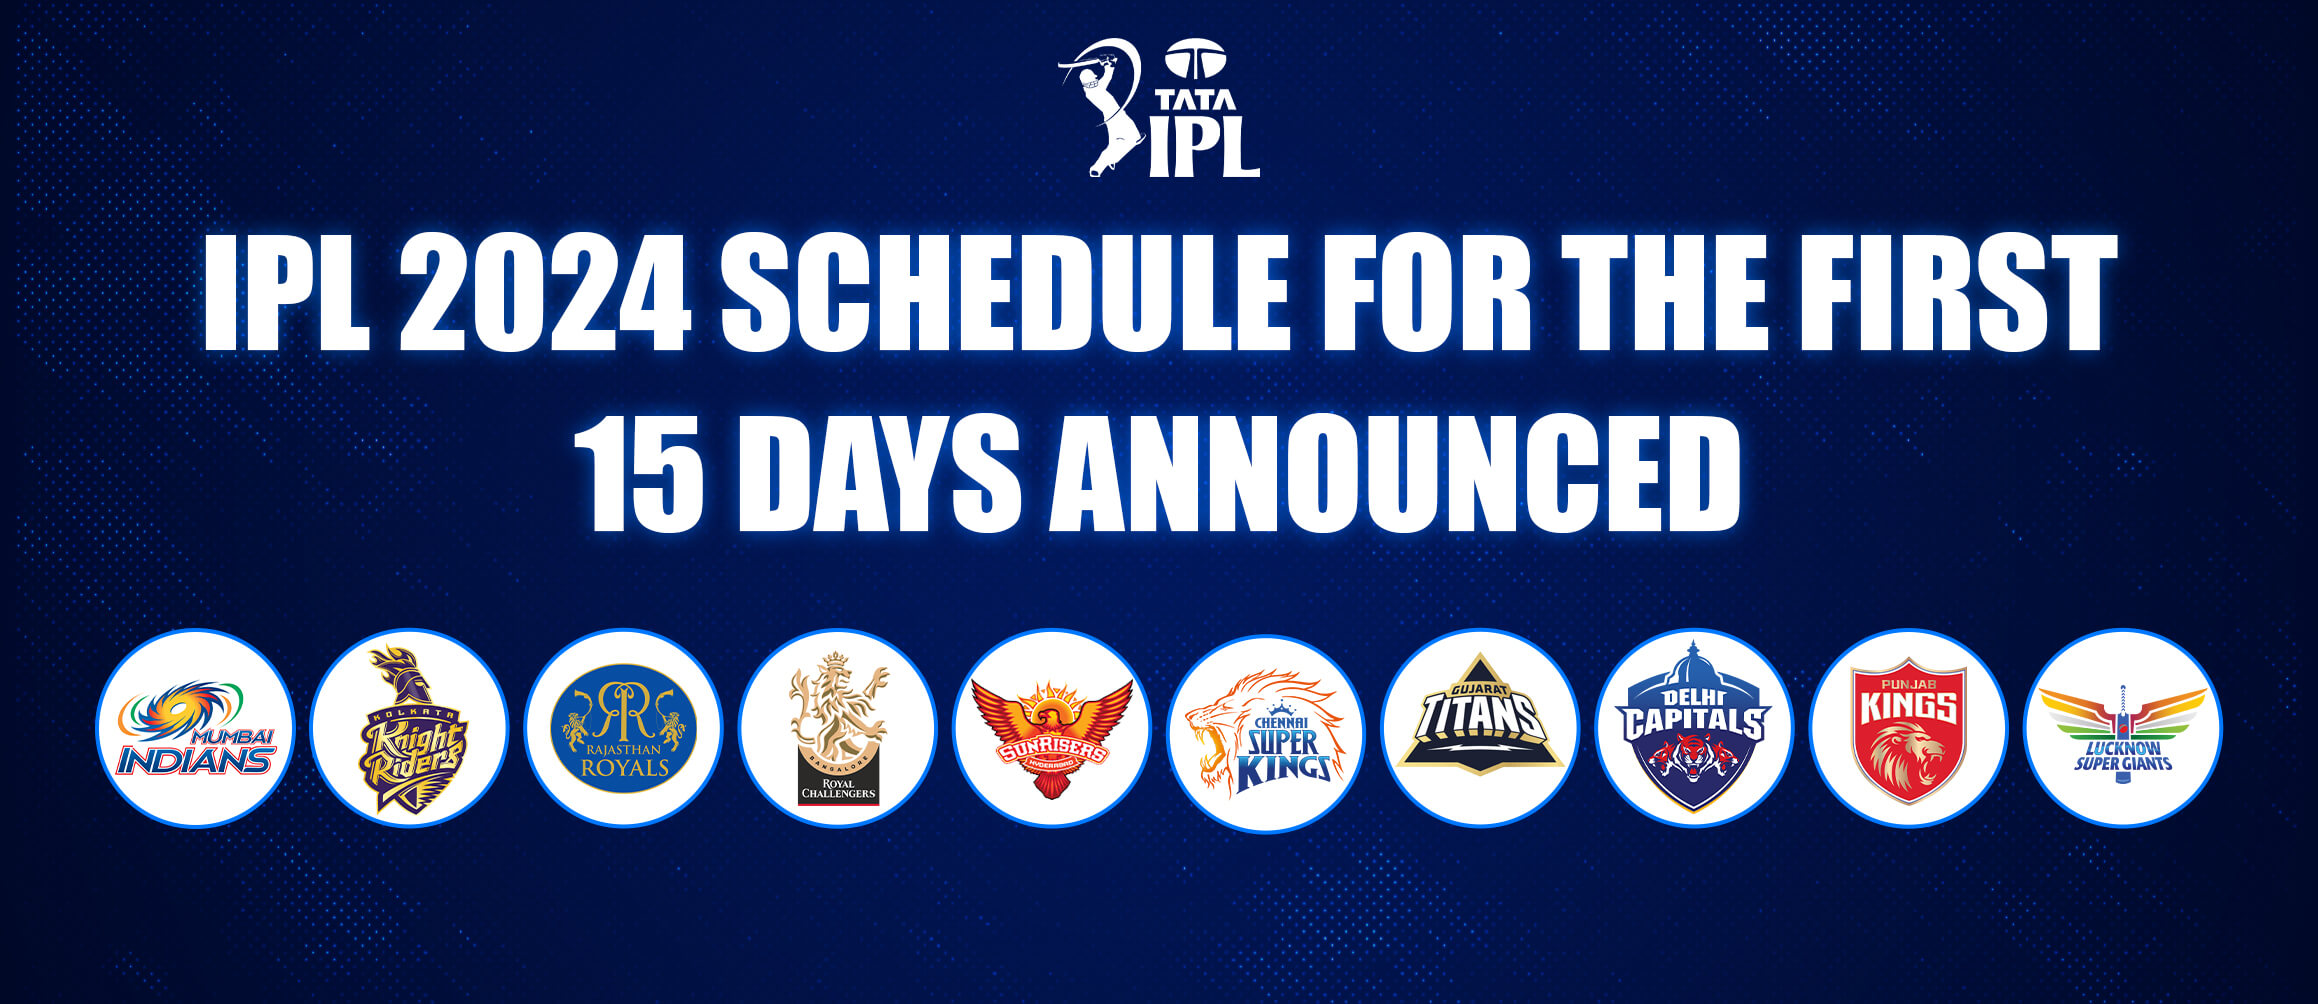 IPL 2024: Schedule for the First 15 Days announced!